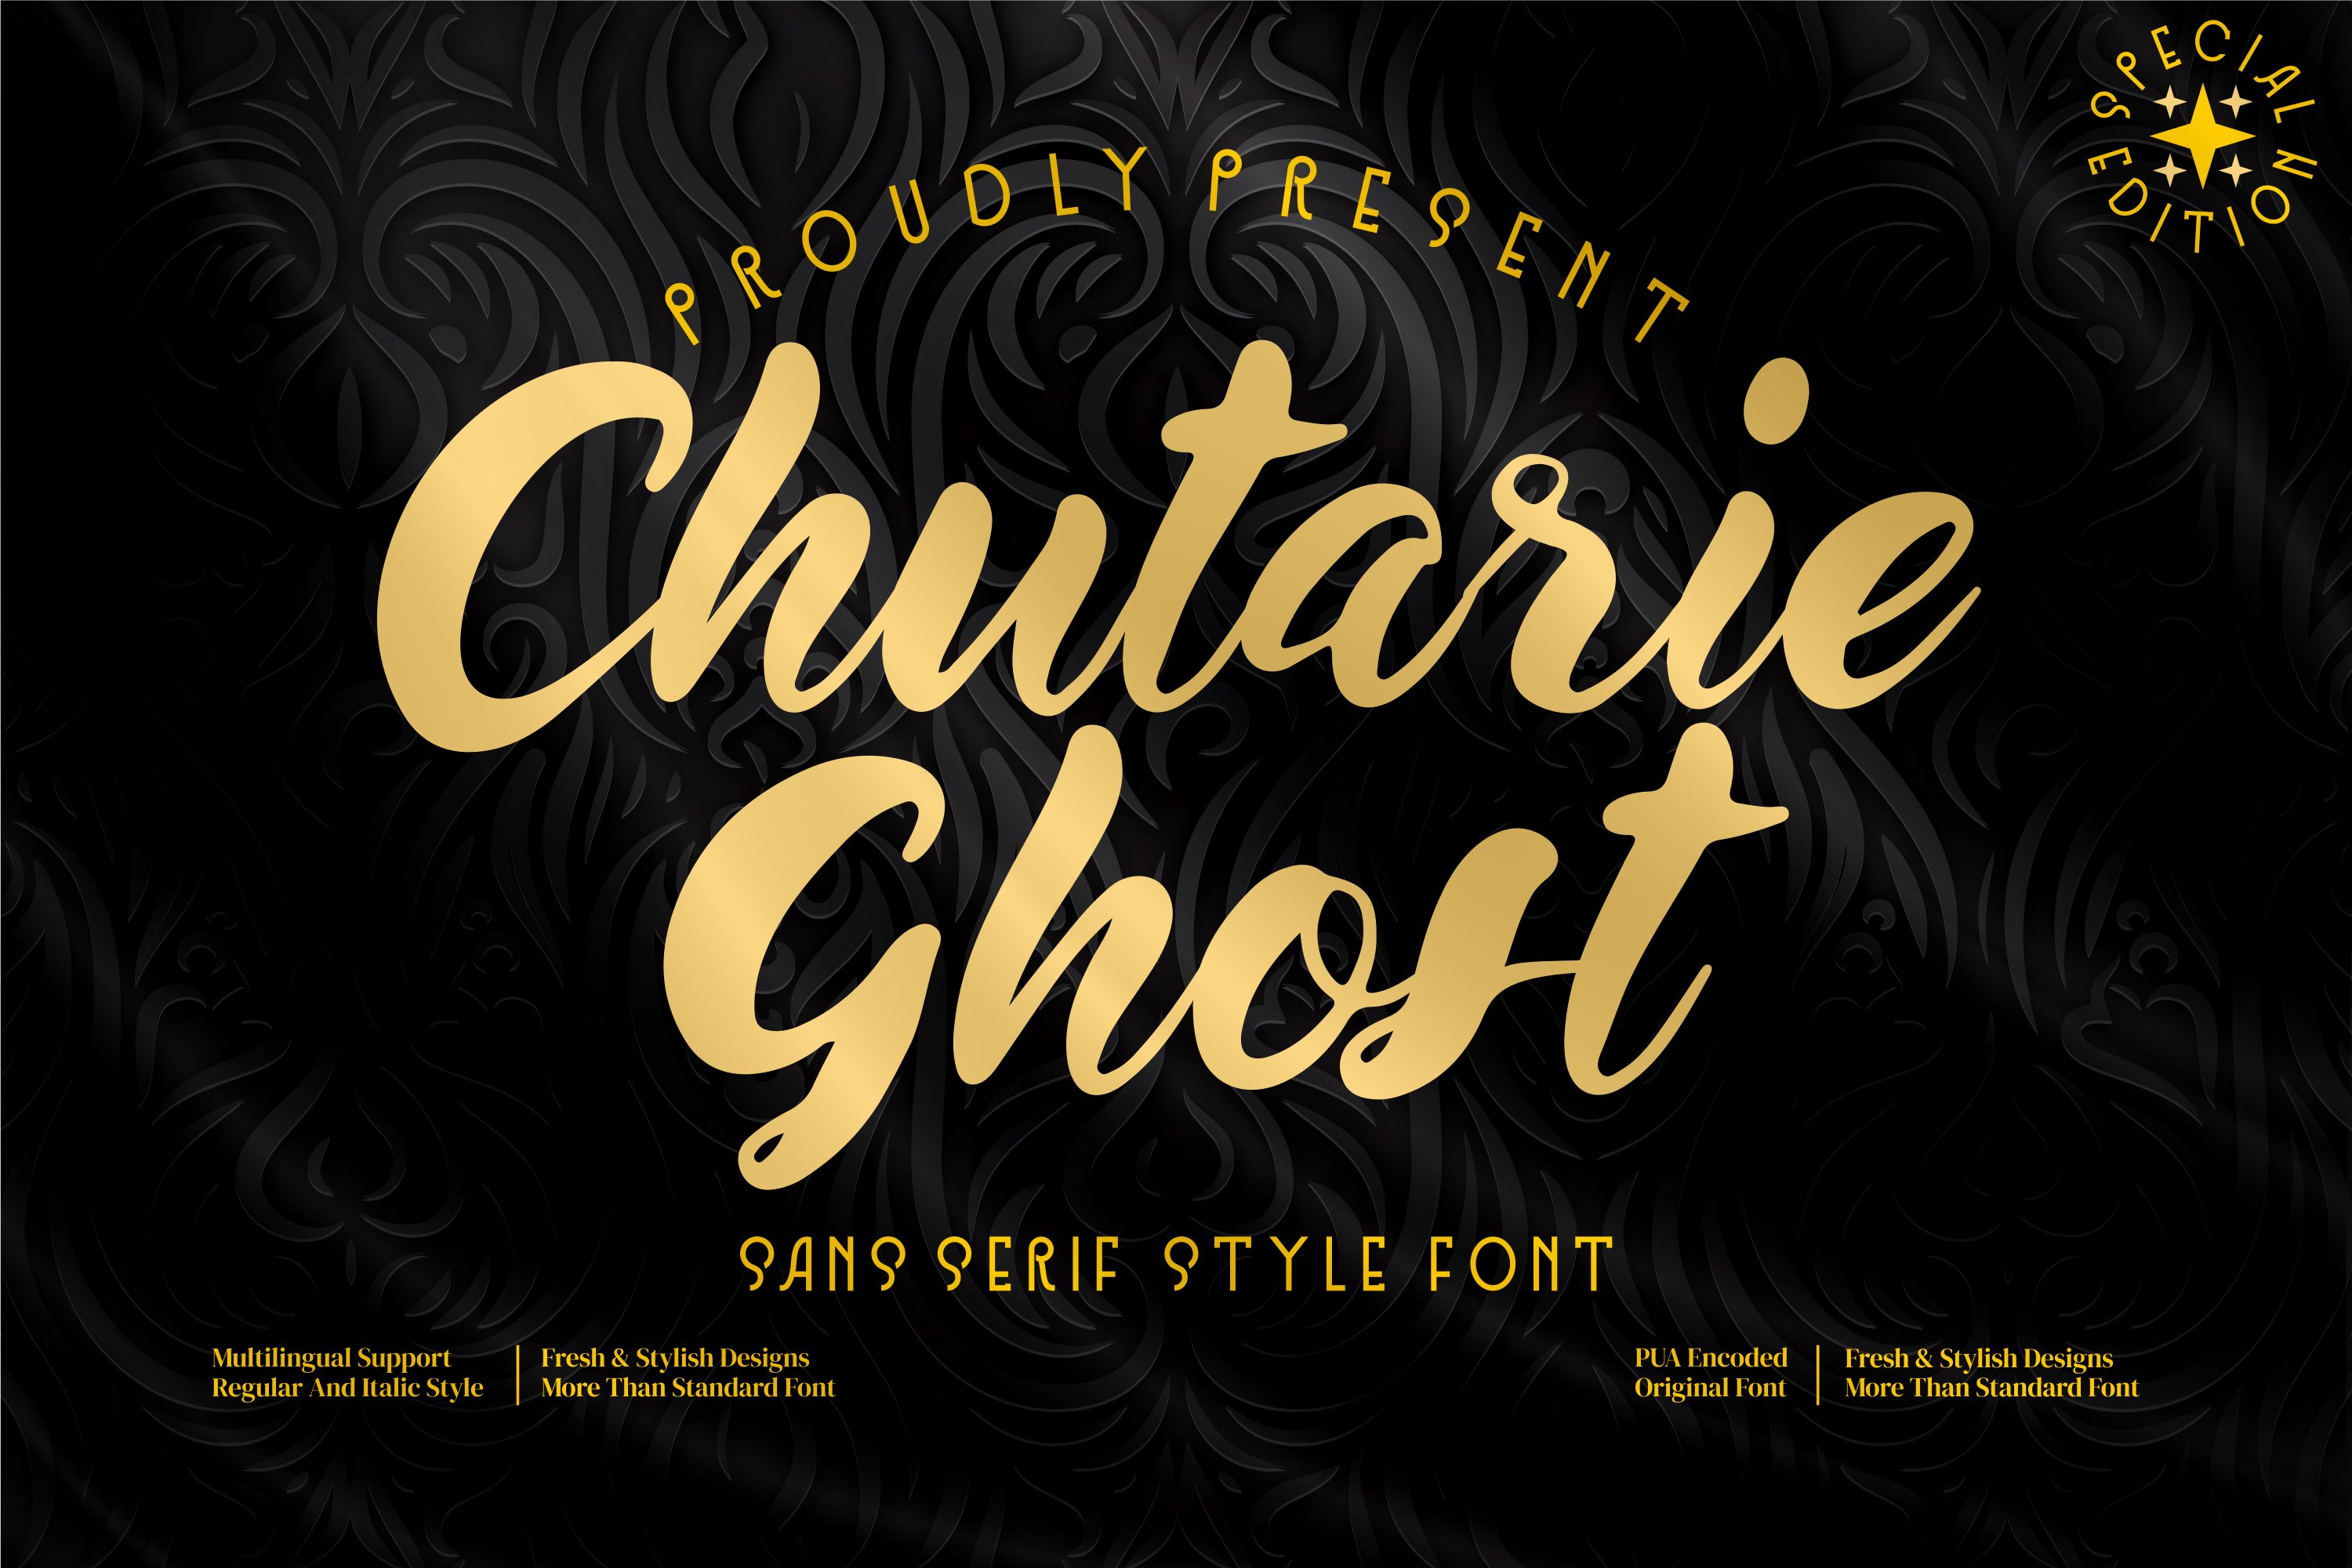 Chutarie Ghost Script style font cover image.